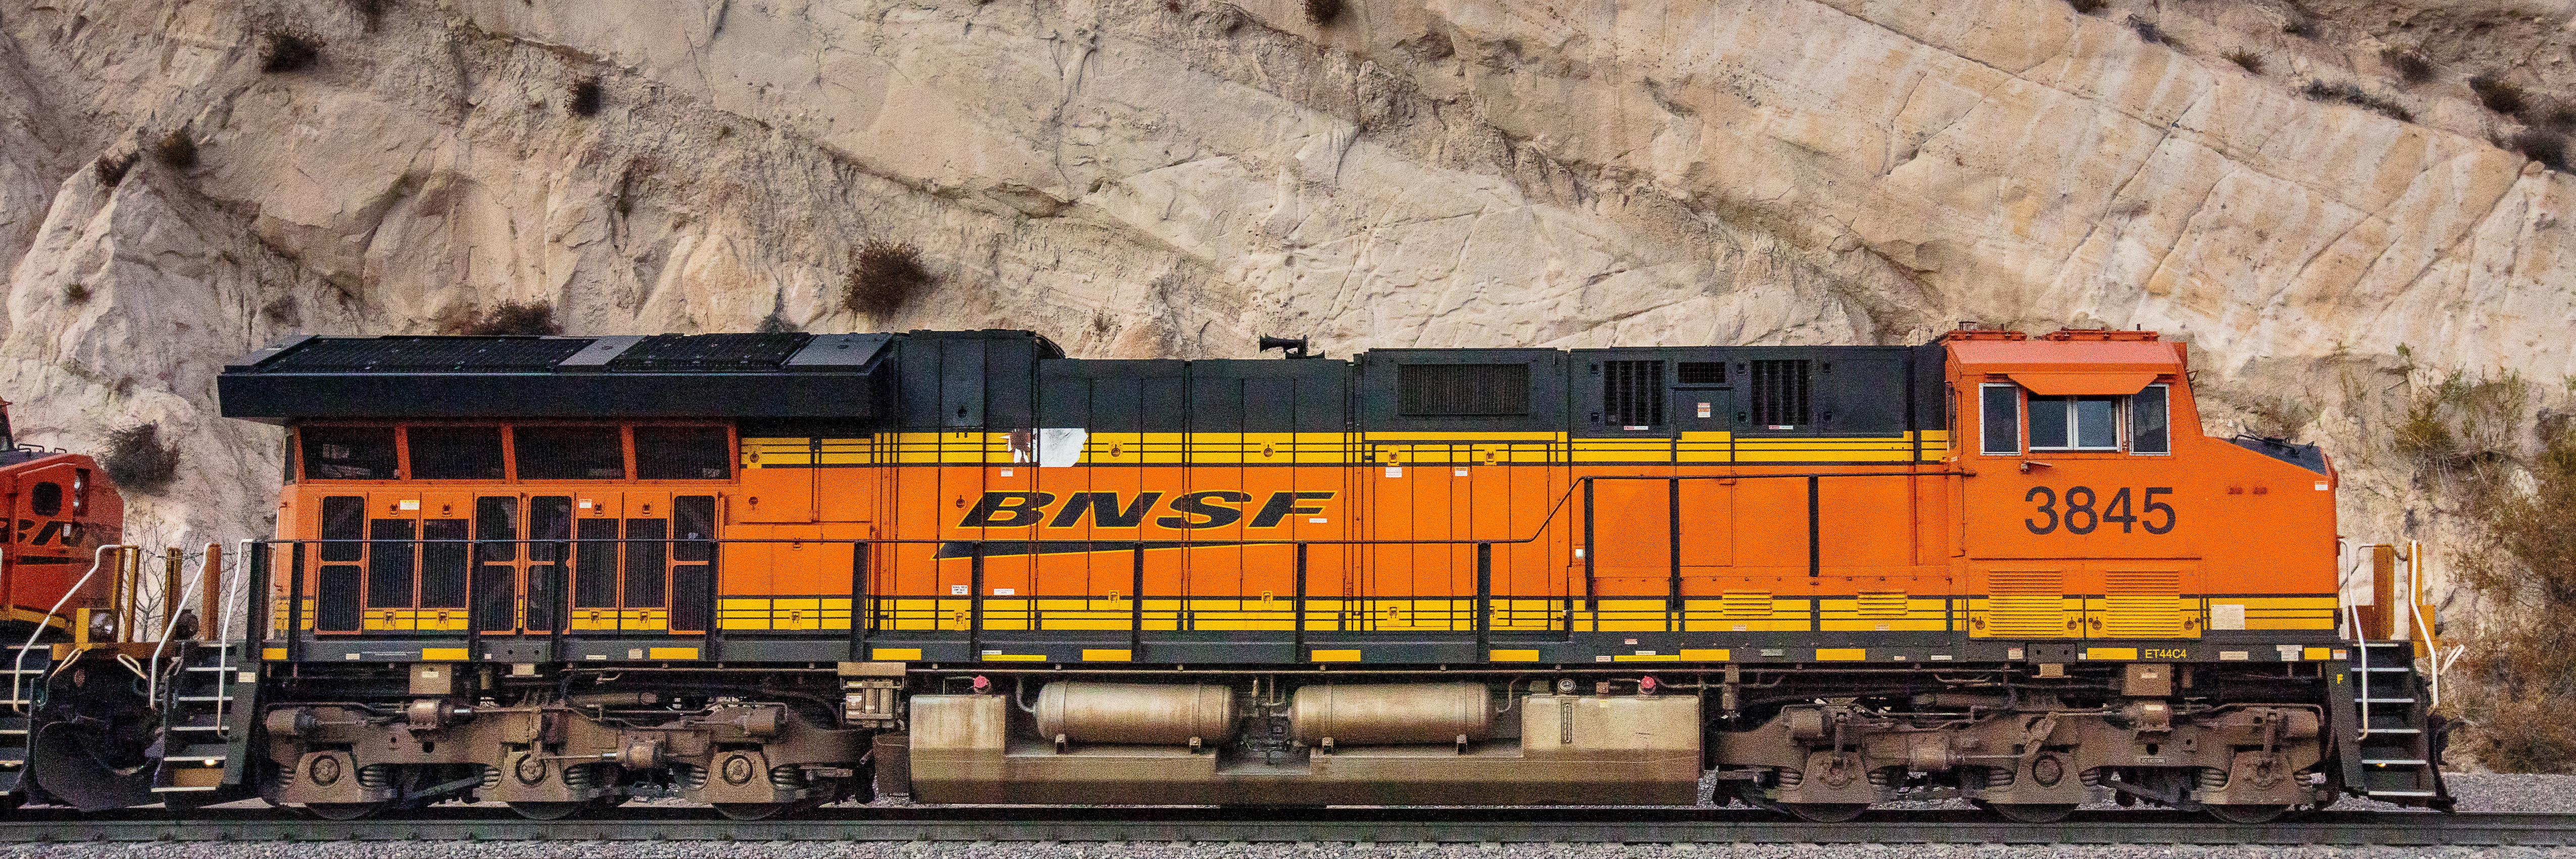 Stephen Mallon Color Photograph -  "Locomotive BNSF 3845" limited edition photograph (freight train in landscape)